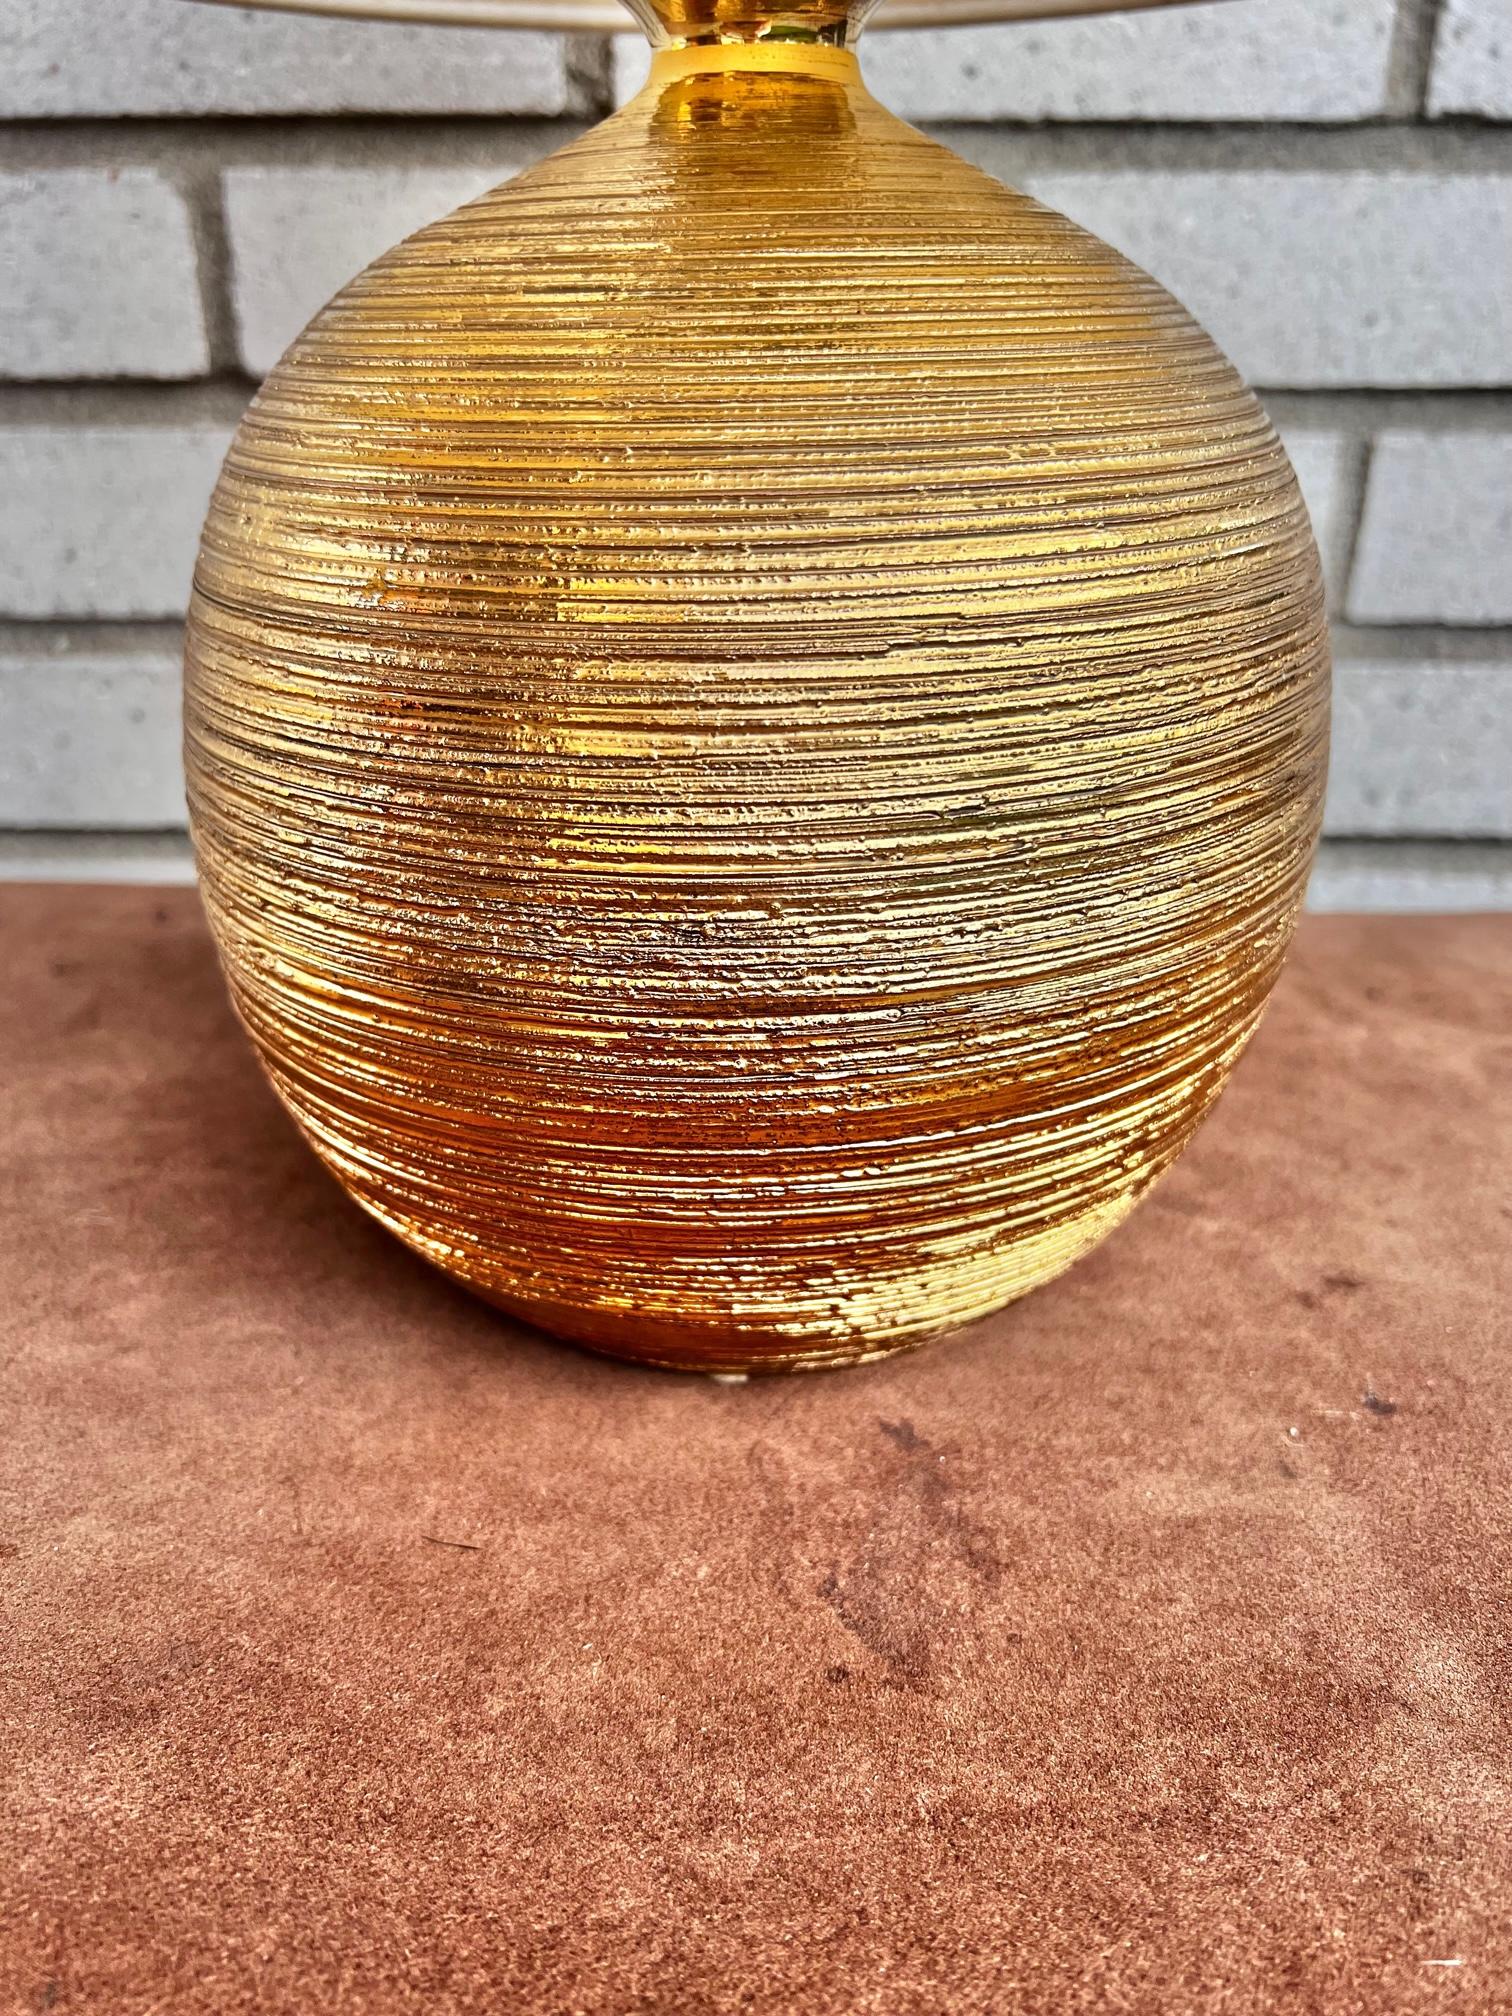 Mid-20th Century Table Lamp in Ceramic with Golden Glaze by Bitossi for Bergboms For Sale